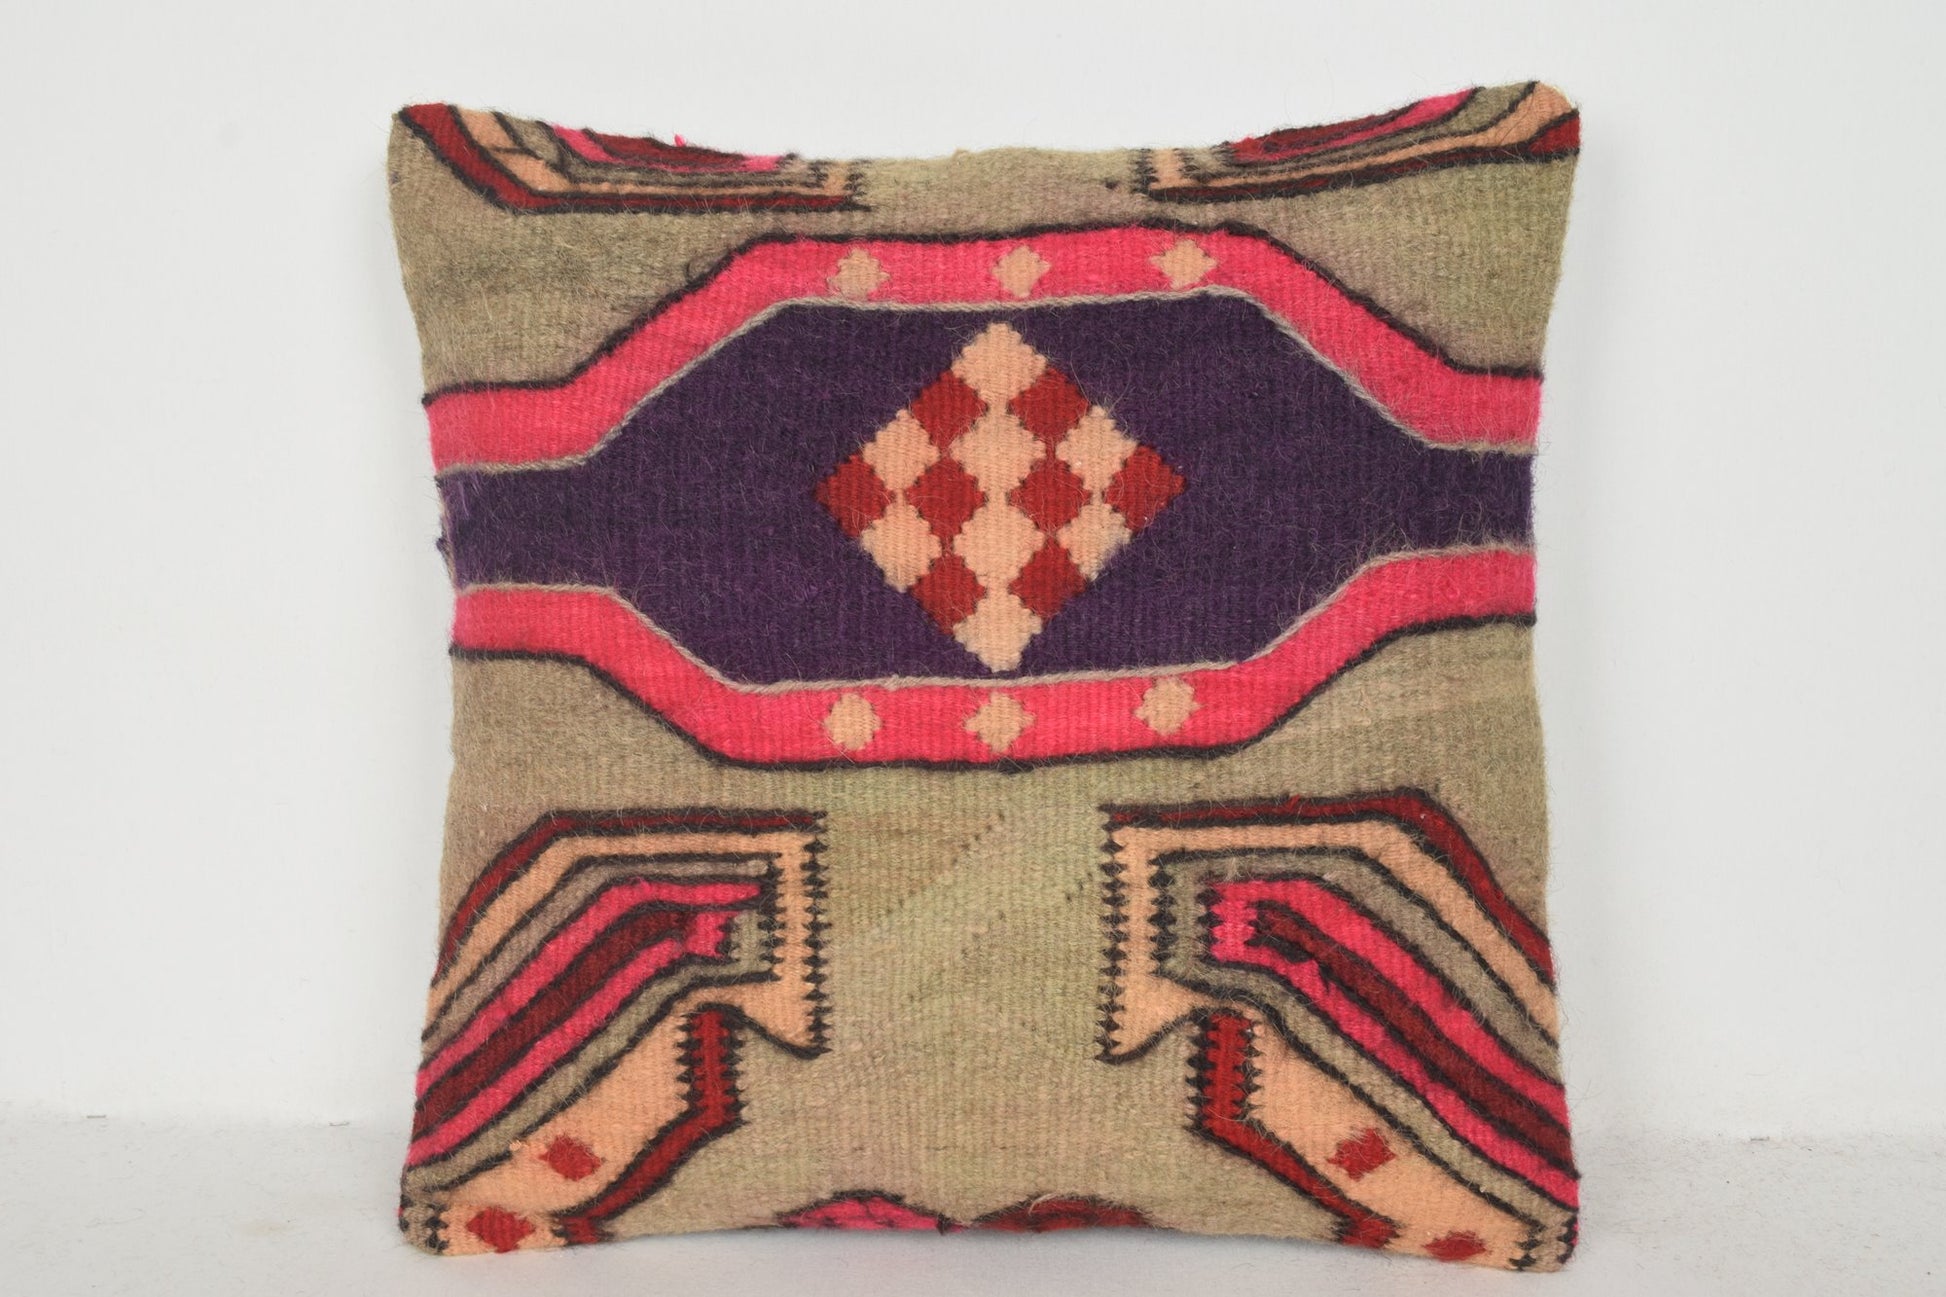 Vintage Kilim Rugs London Pillow B01143 20x20 Great Accessory Lace